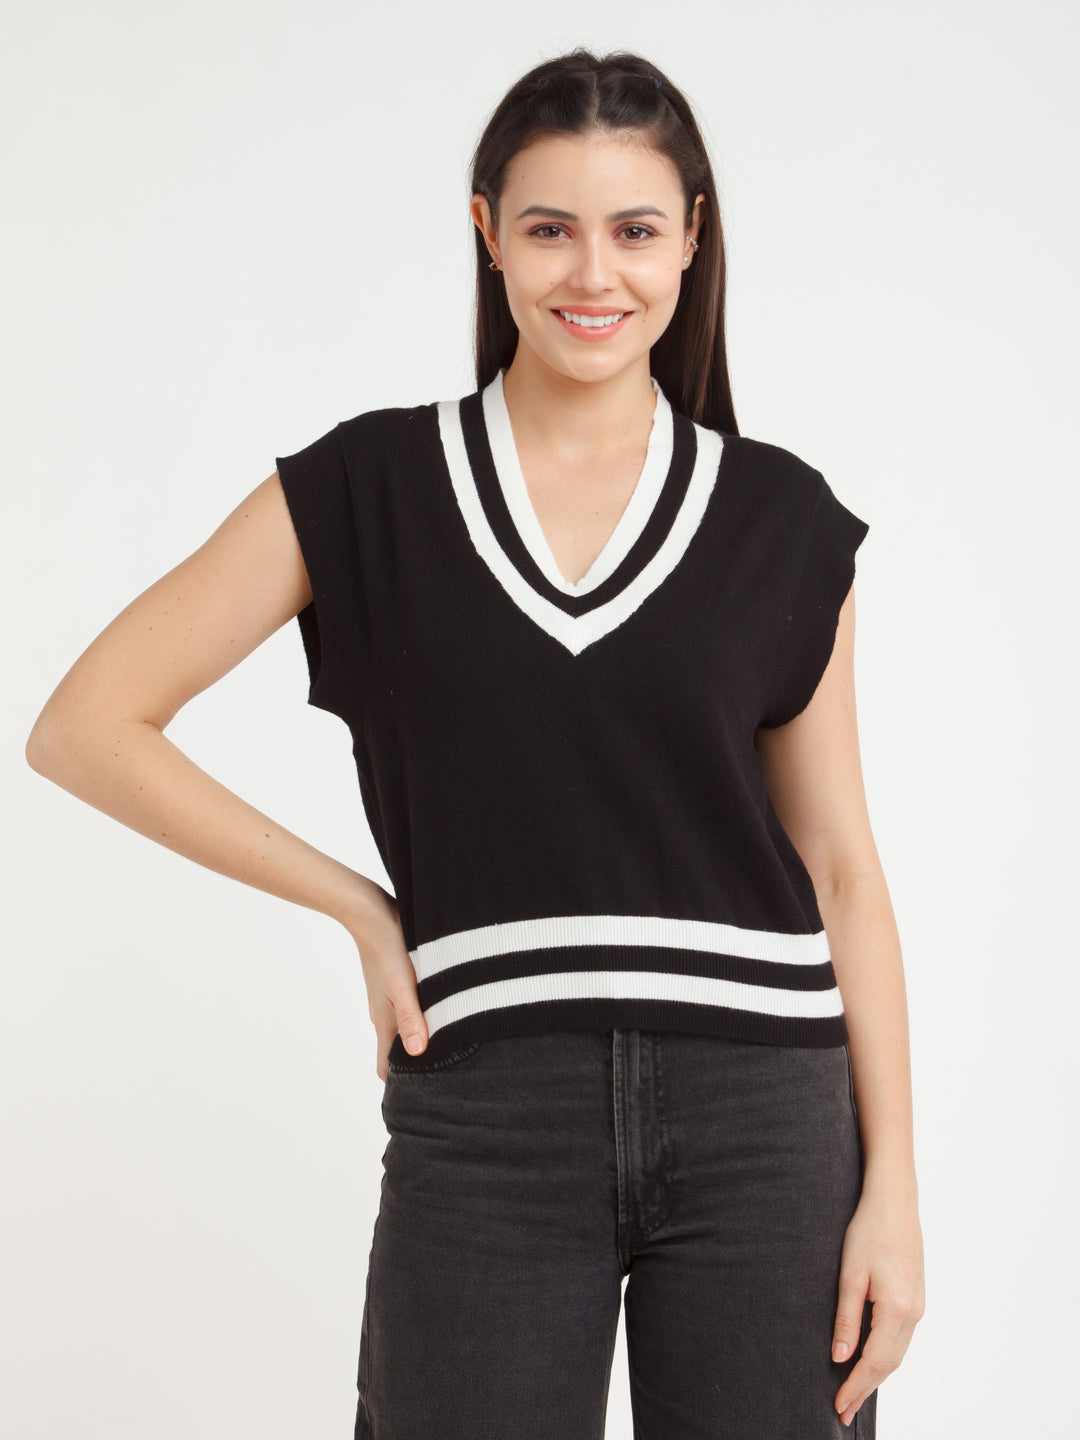 Black Solid Sweater For Women